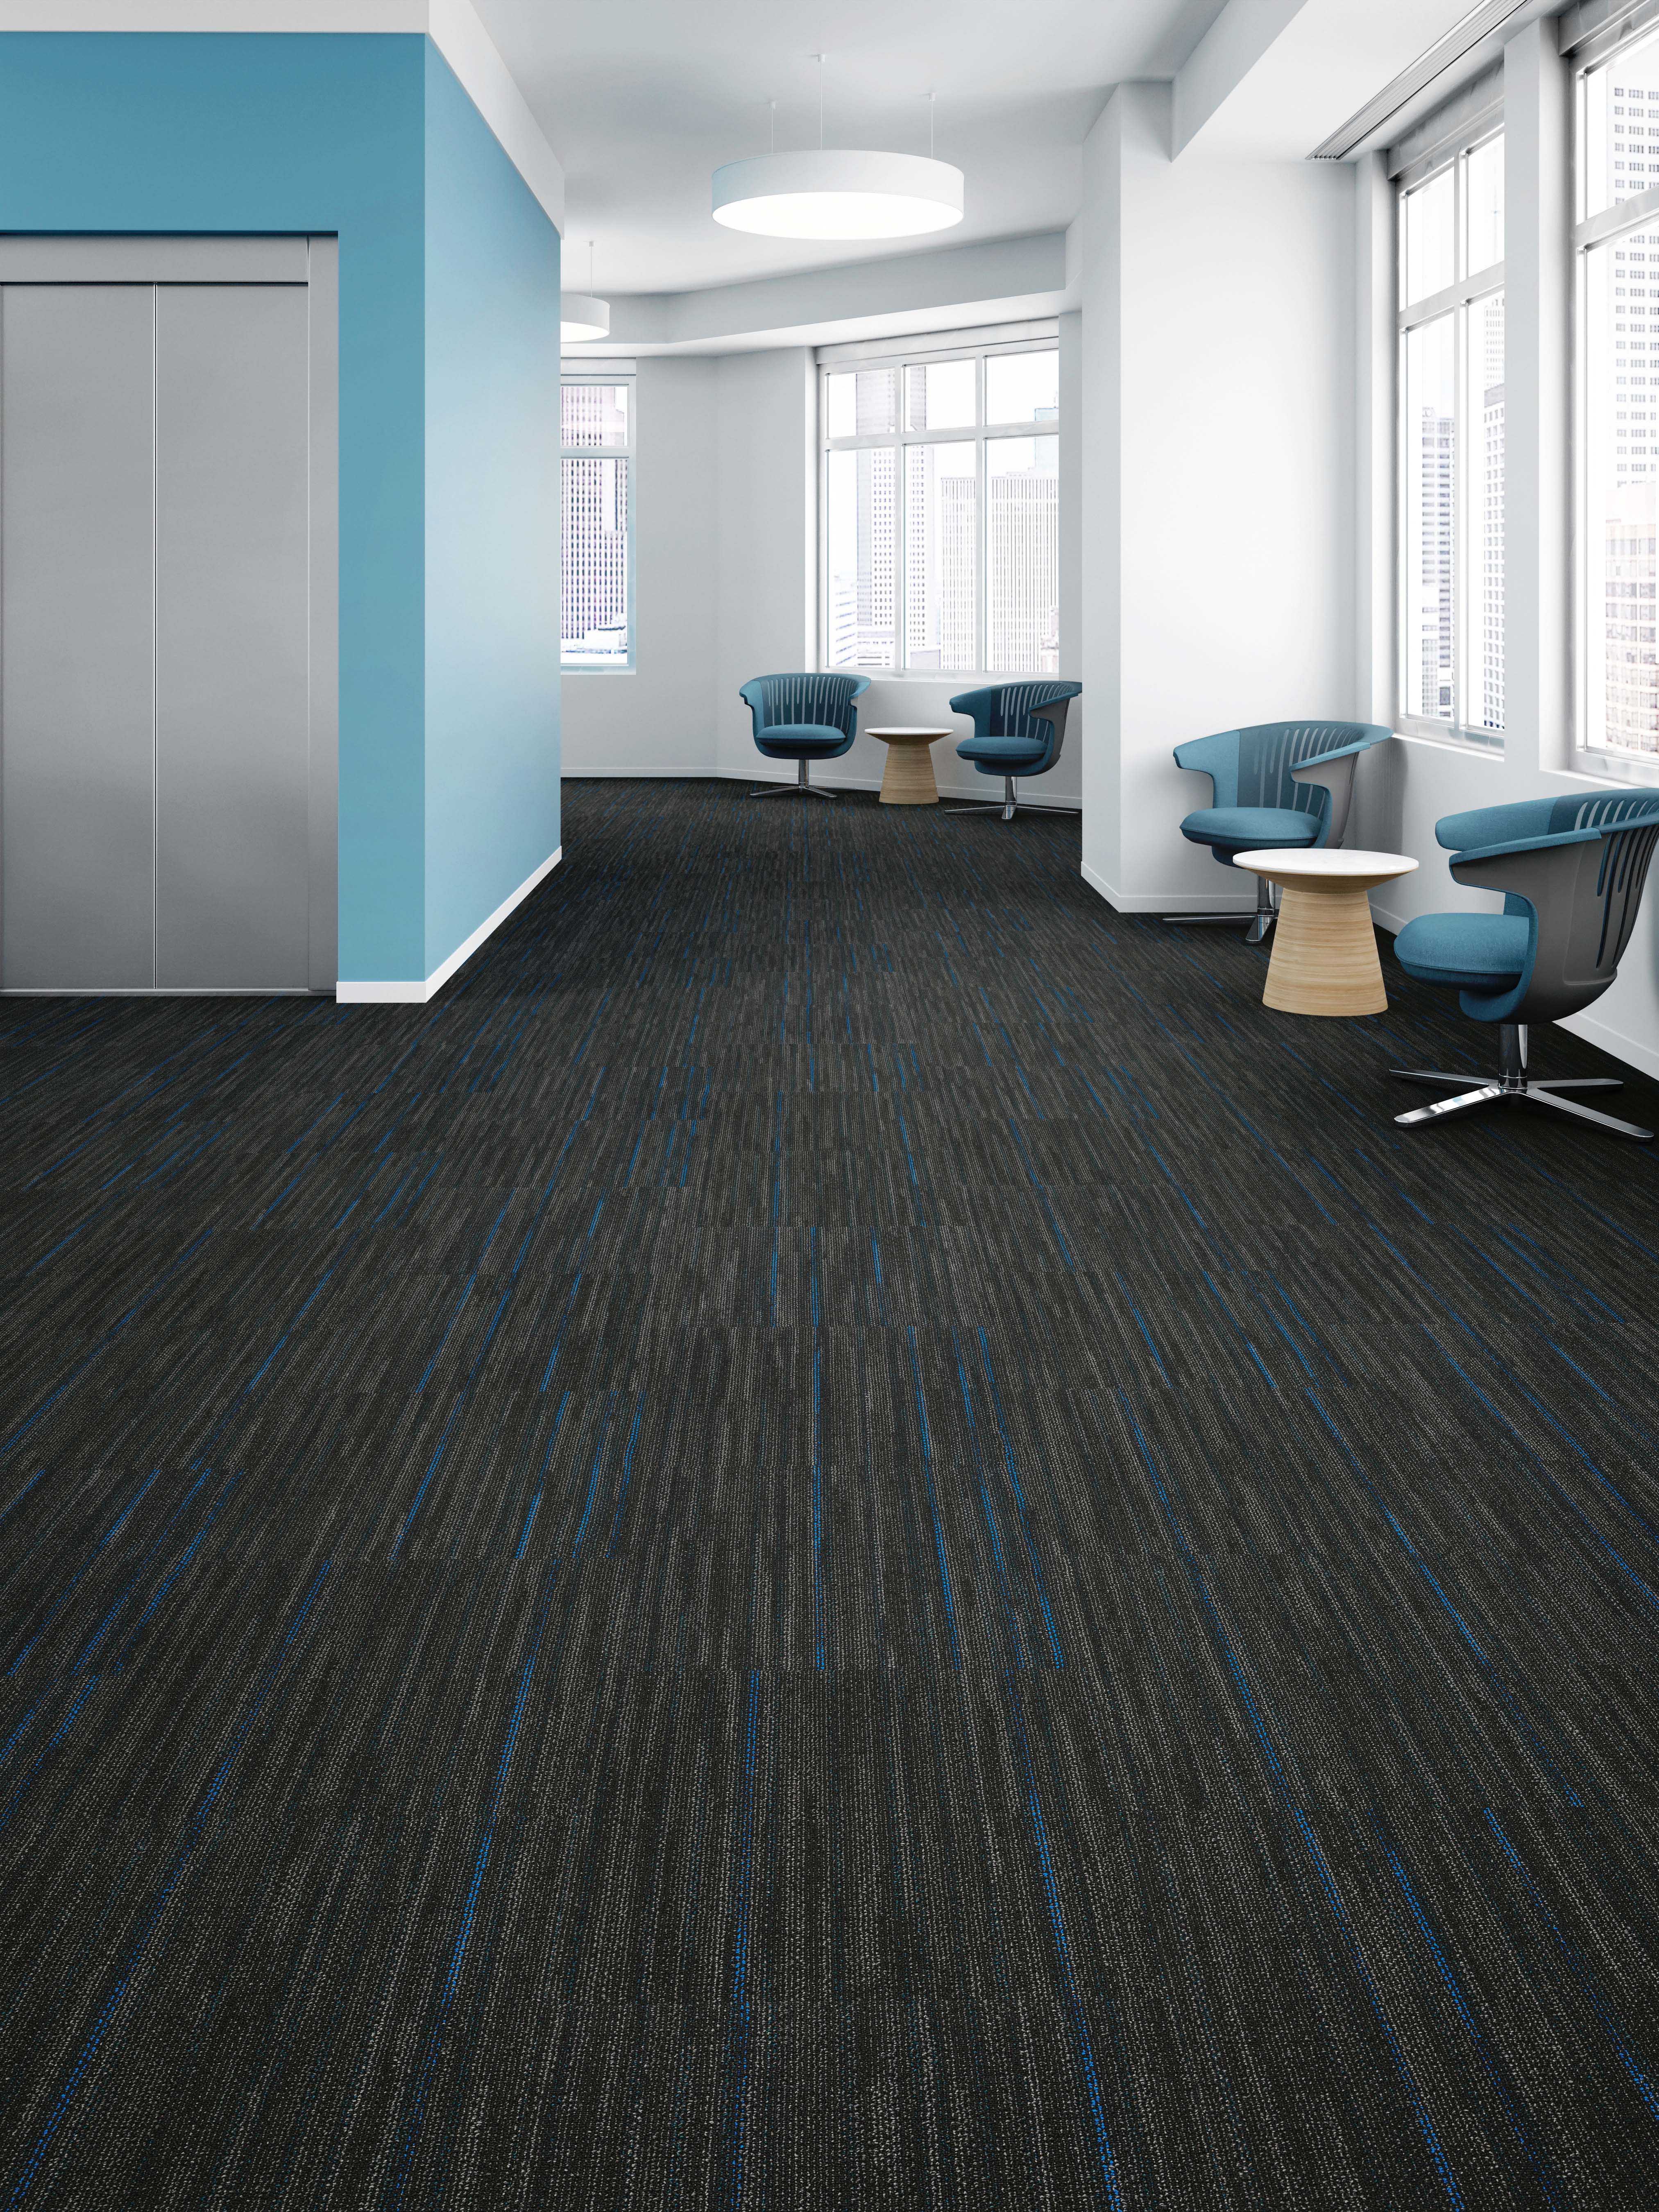 Patcraft introduces Infrastructure carpet collection